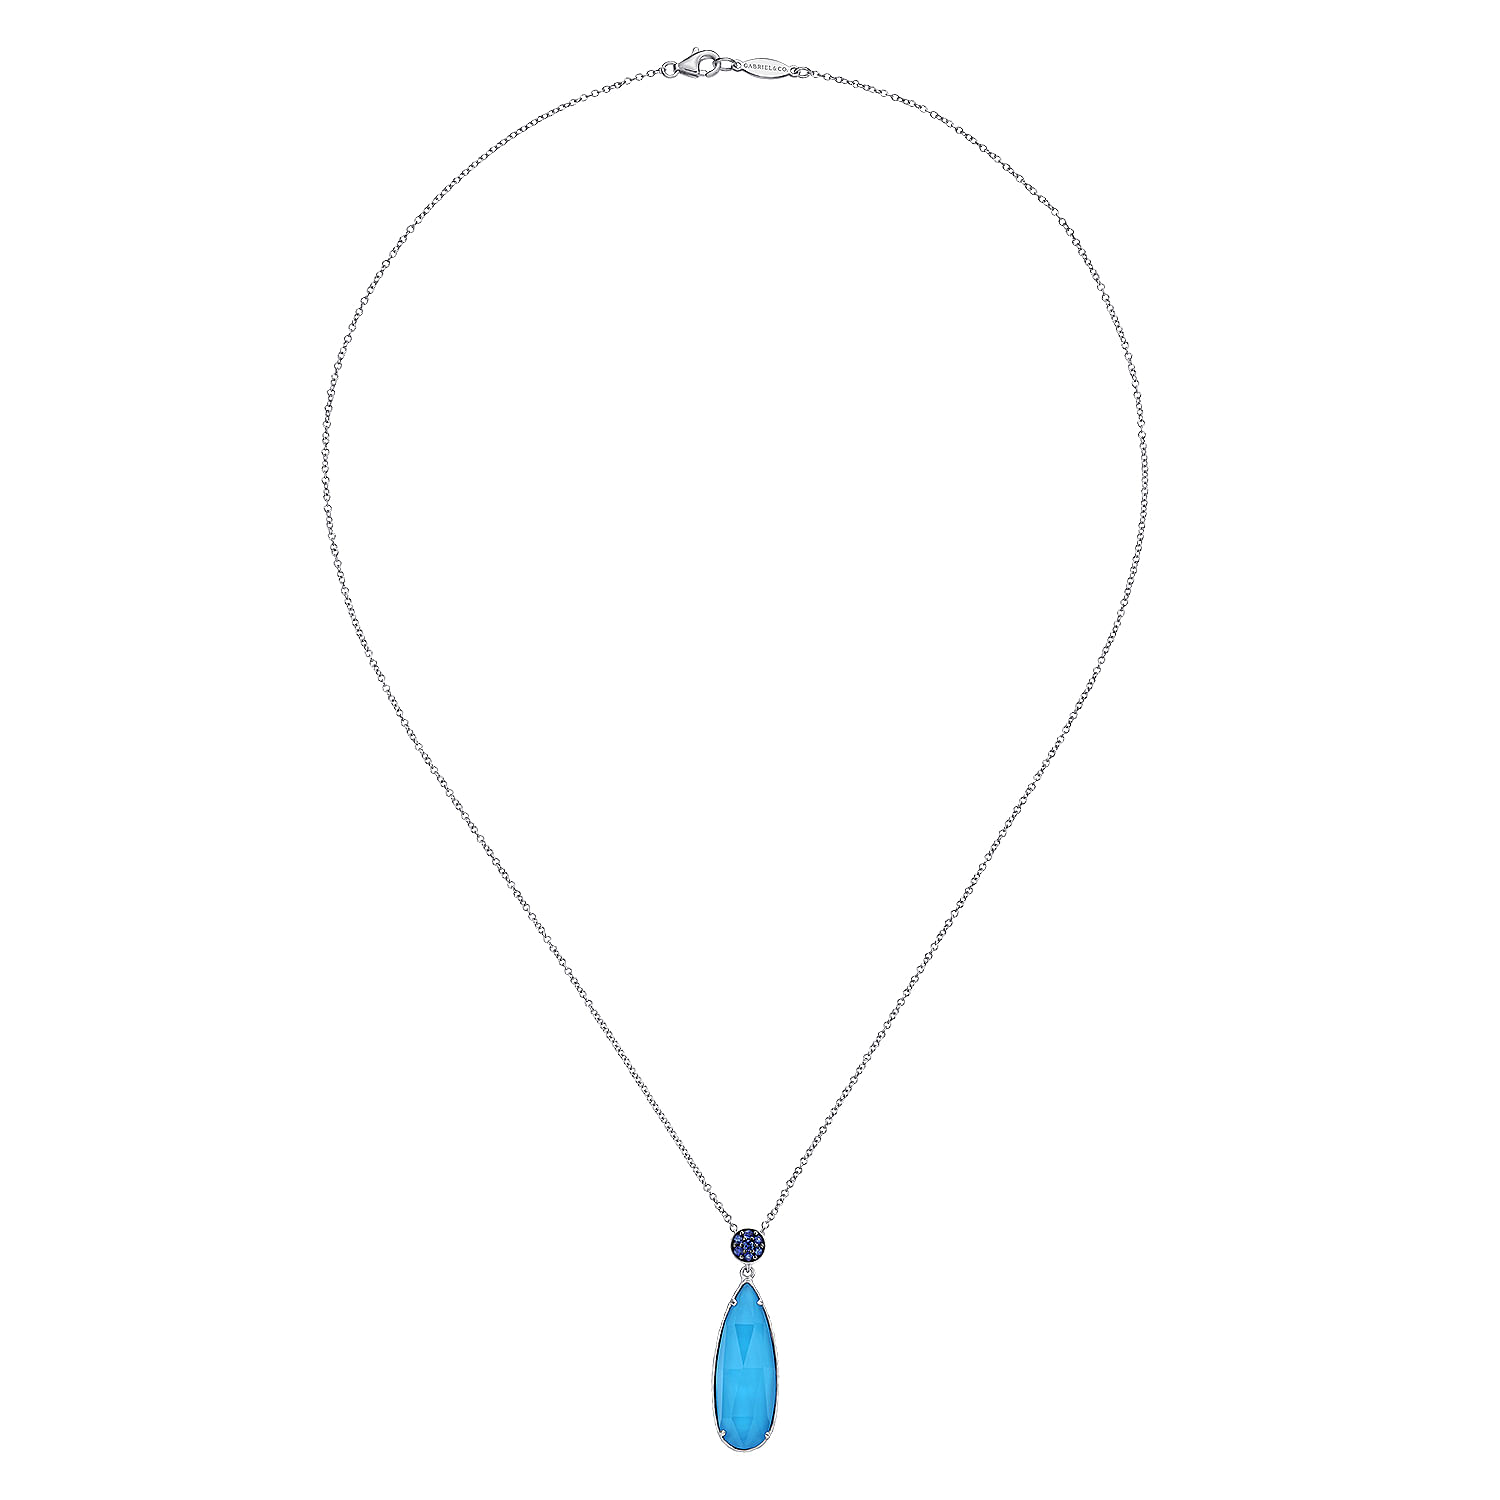 Long 925 Sterling Silver Rock Crystal/Turquoise Teardrop Pendant with Sapphire